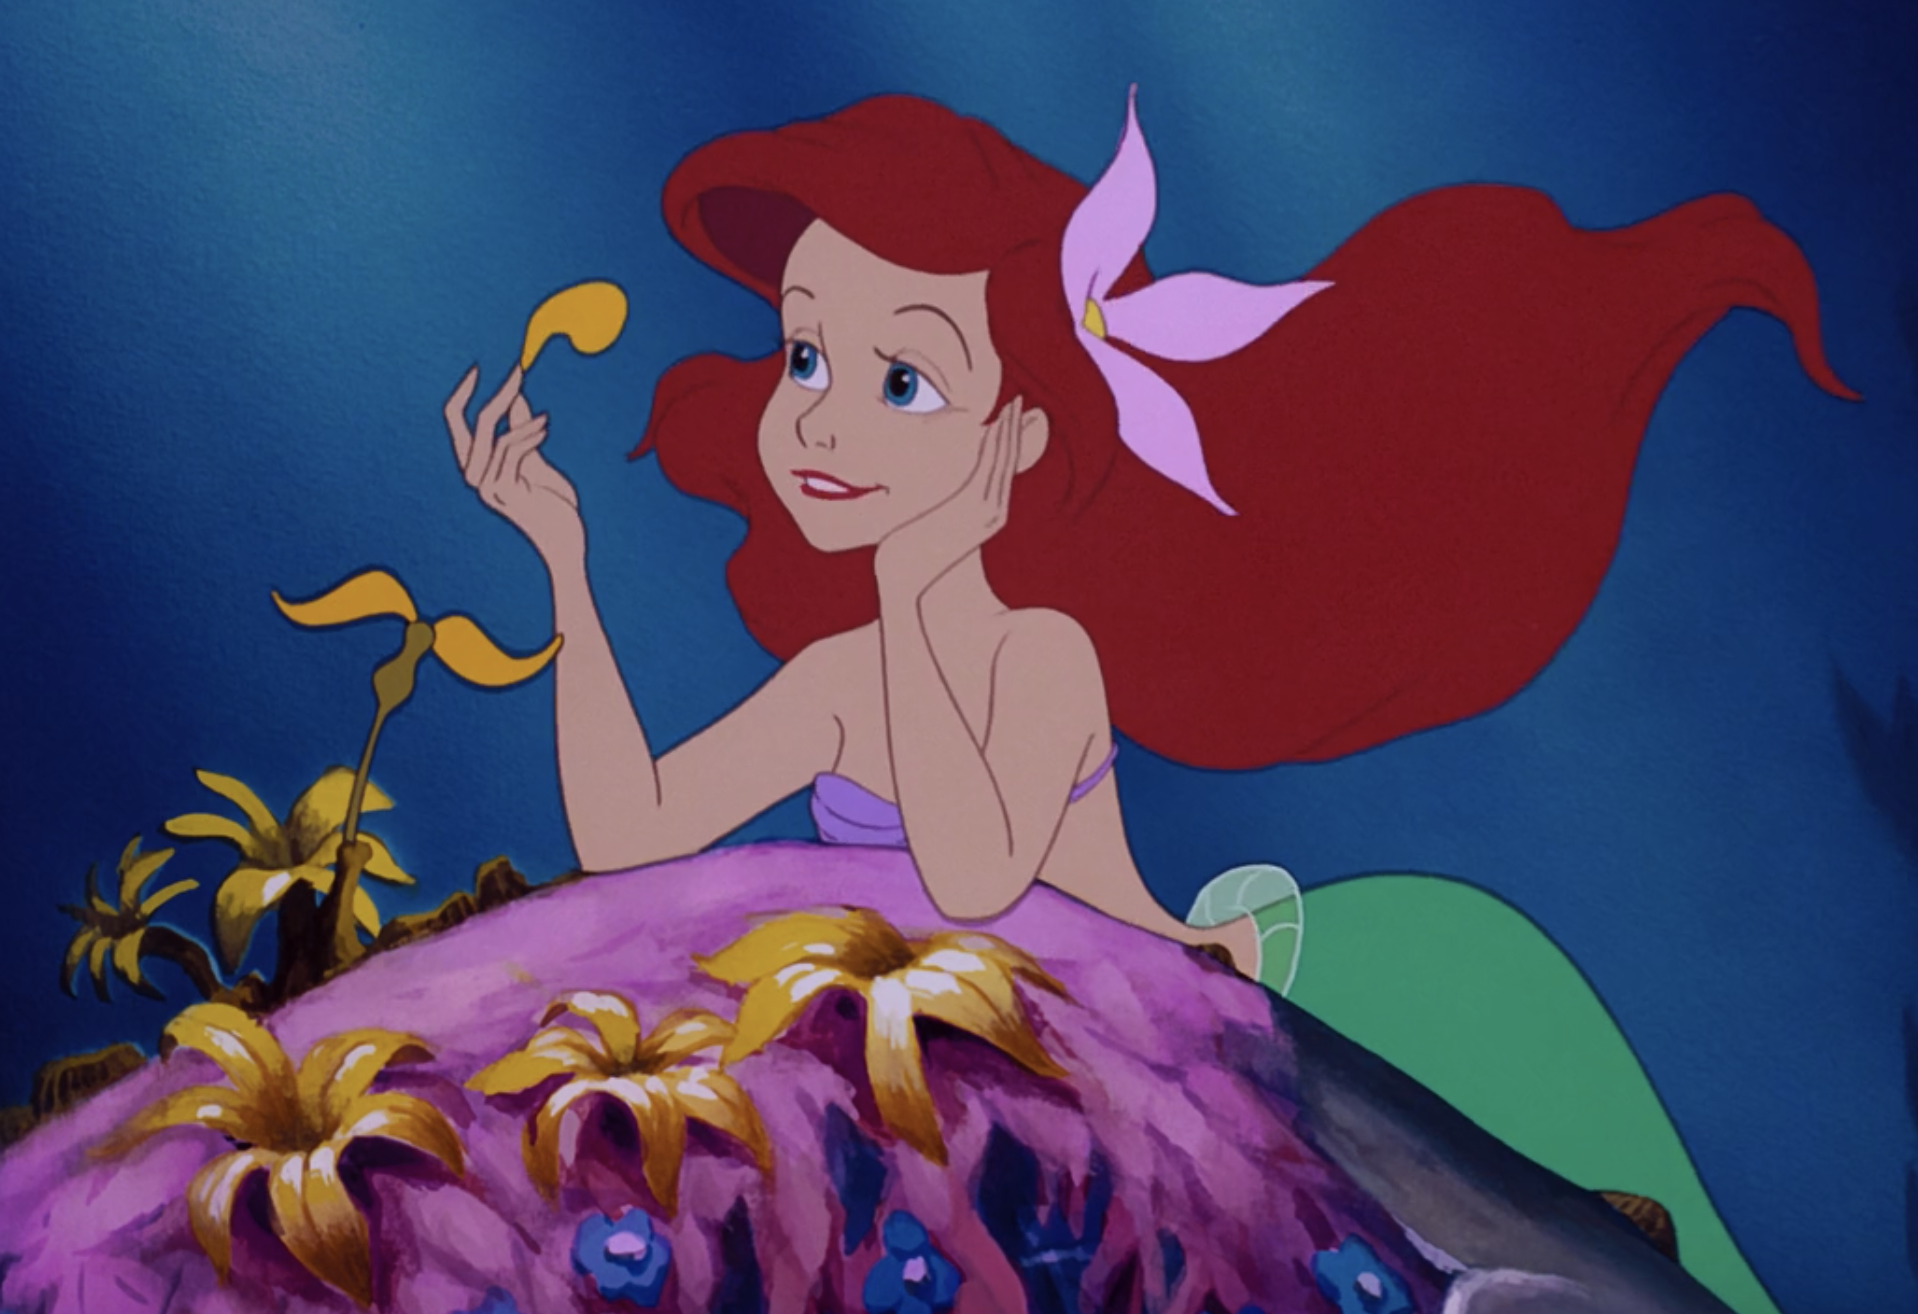 Ariel leans against a rock, picking some seaweed while resting a hand on her chin